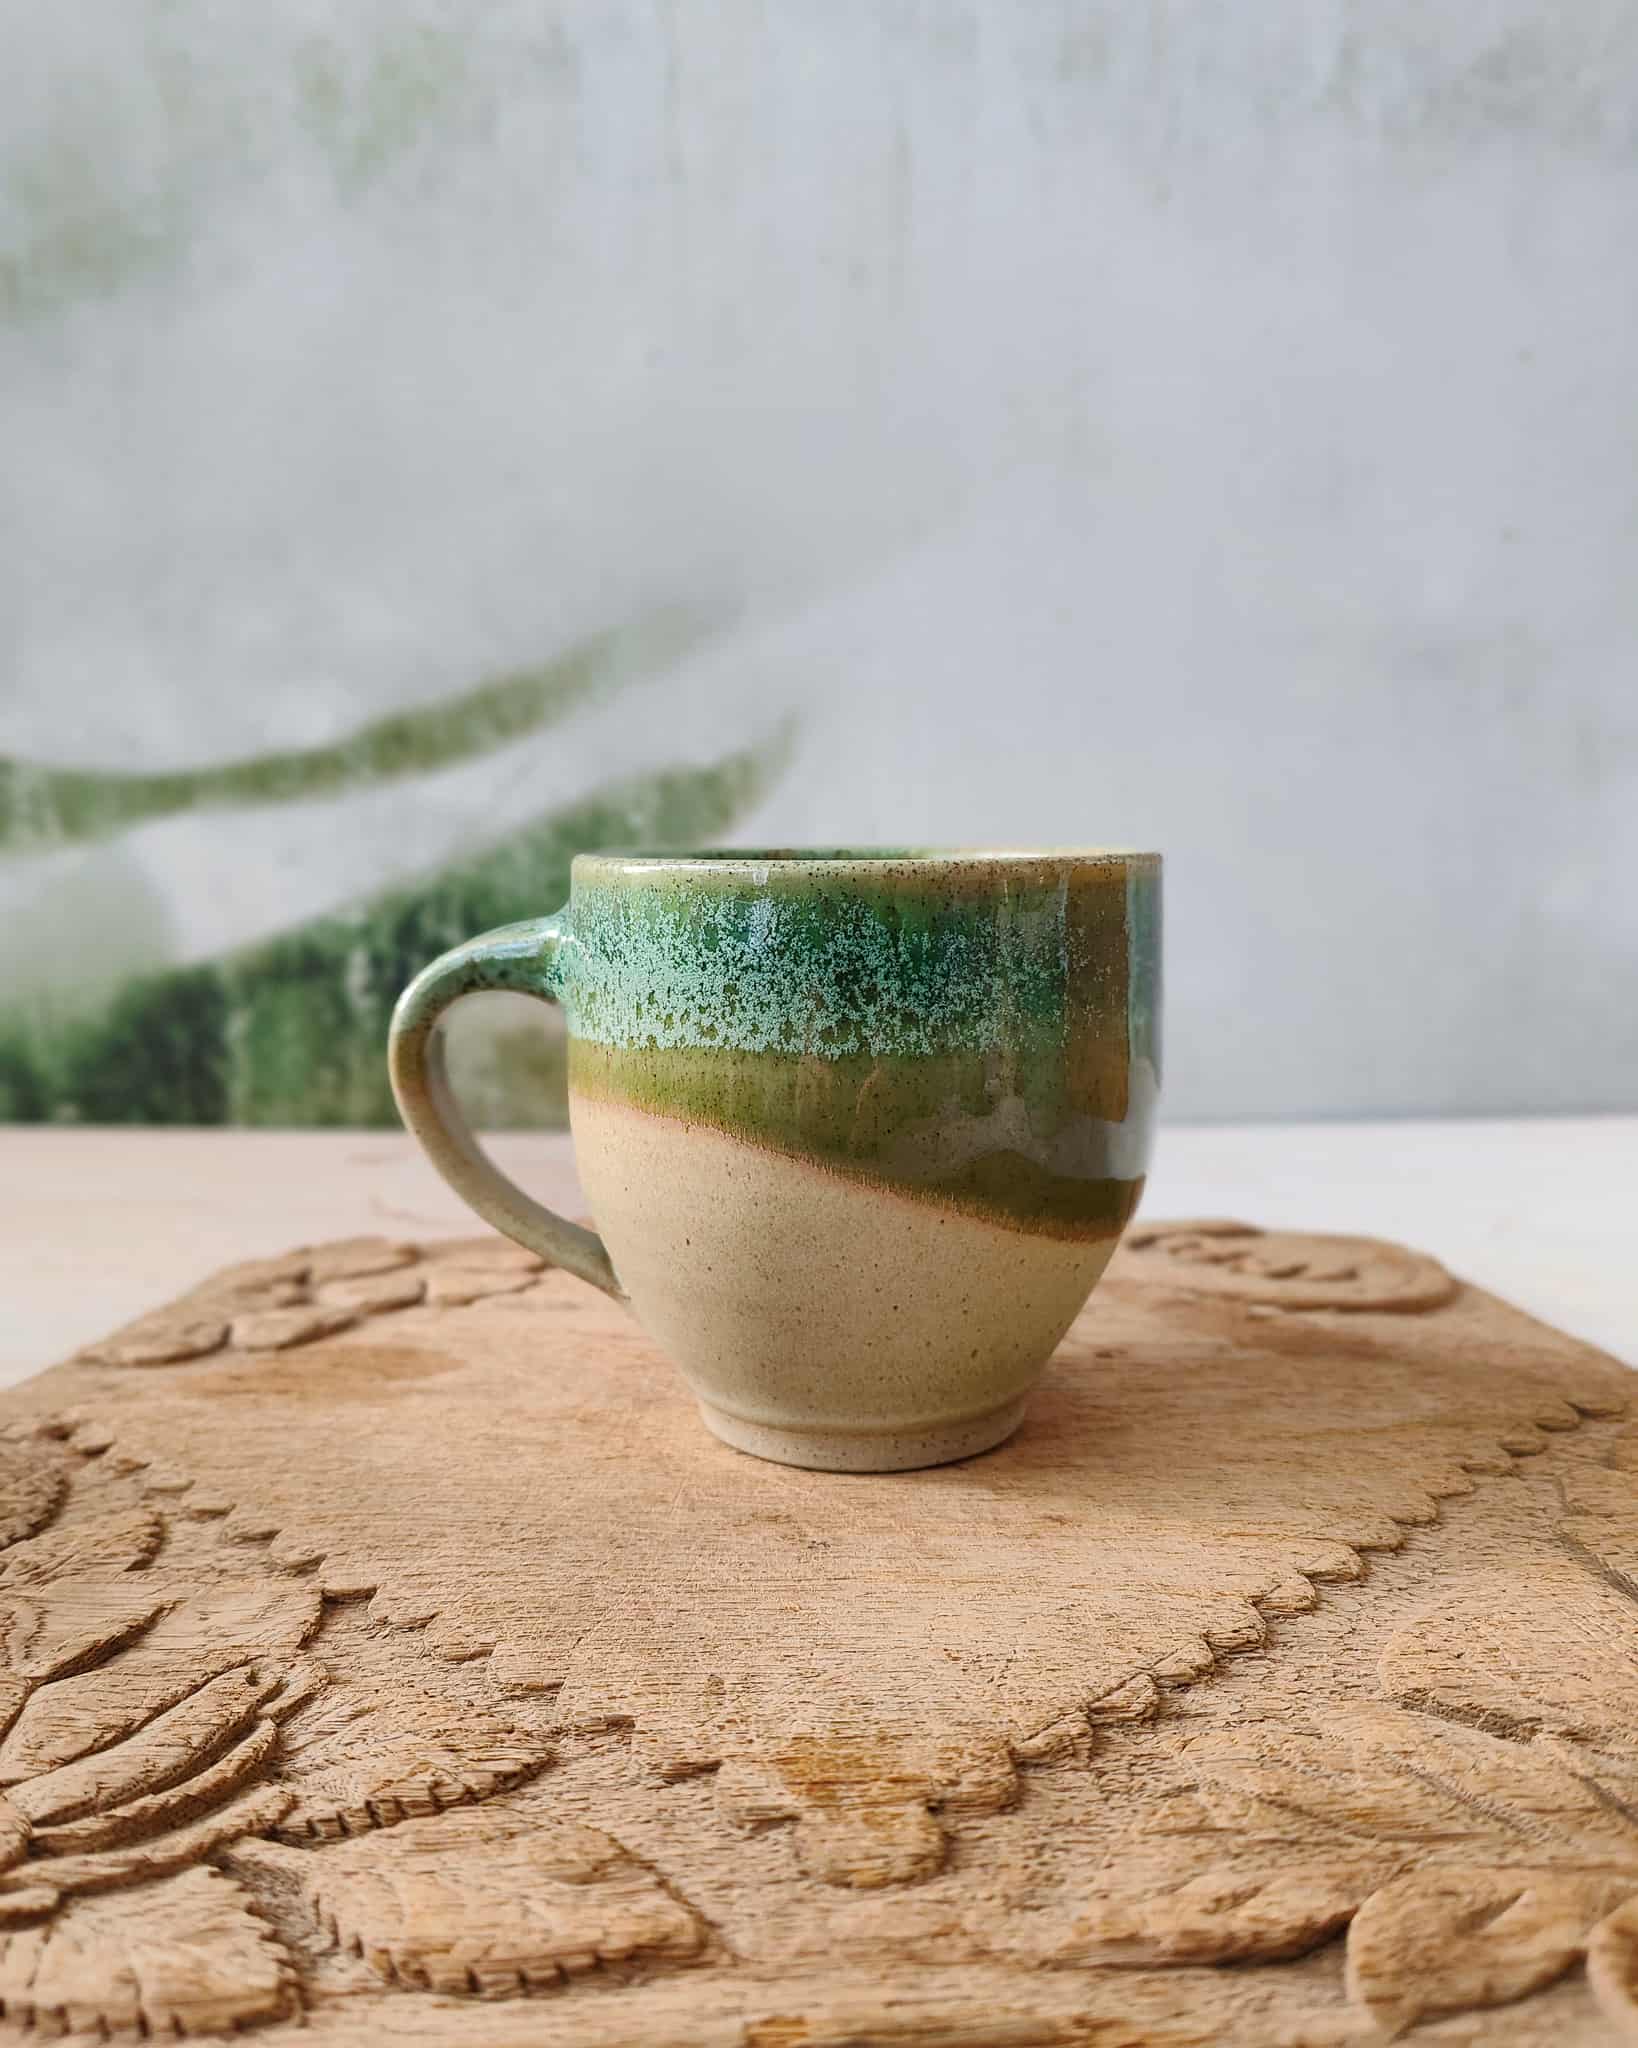 Cabin in the Woods Mug., Rustic ceramic tea cup with layered matte oat and green glaze